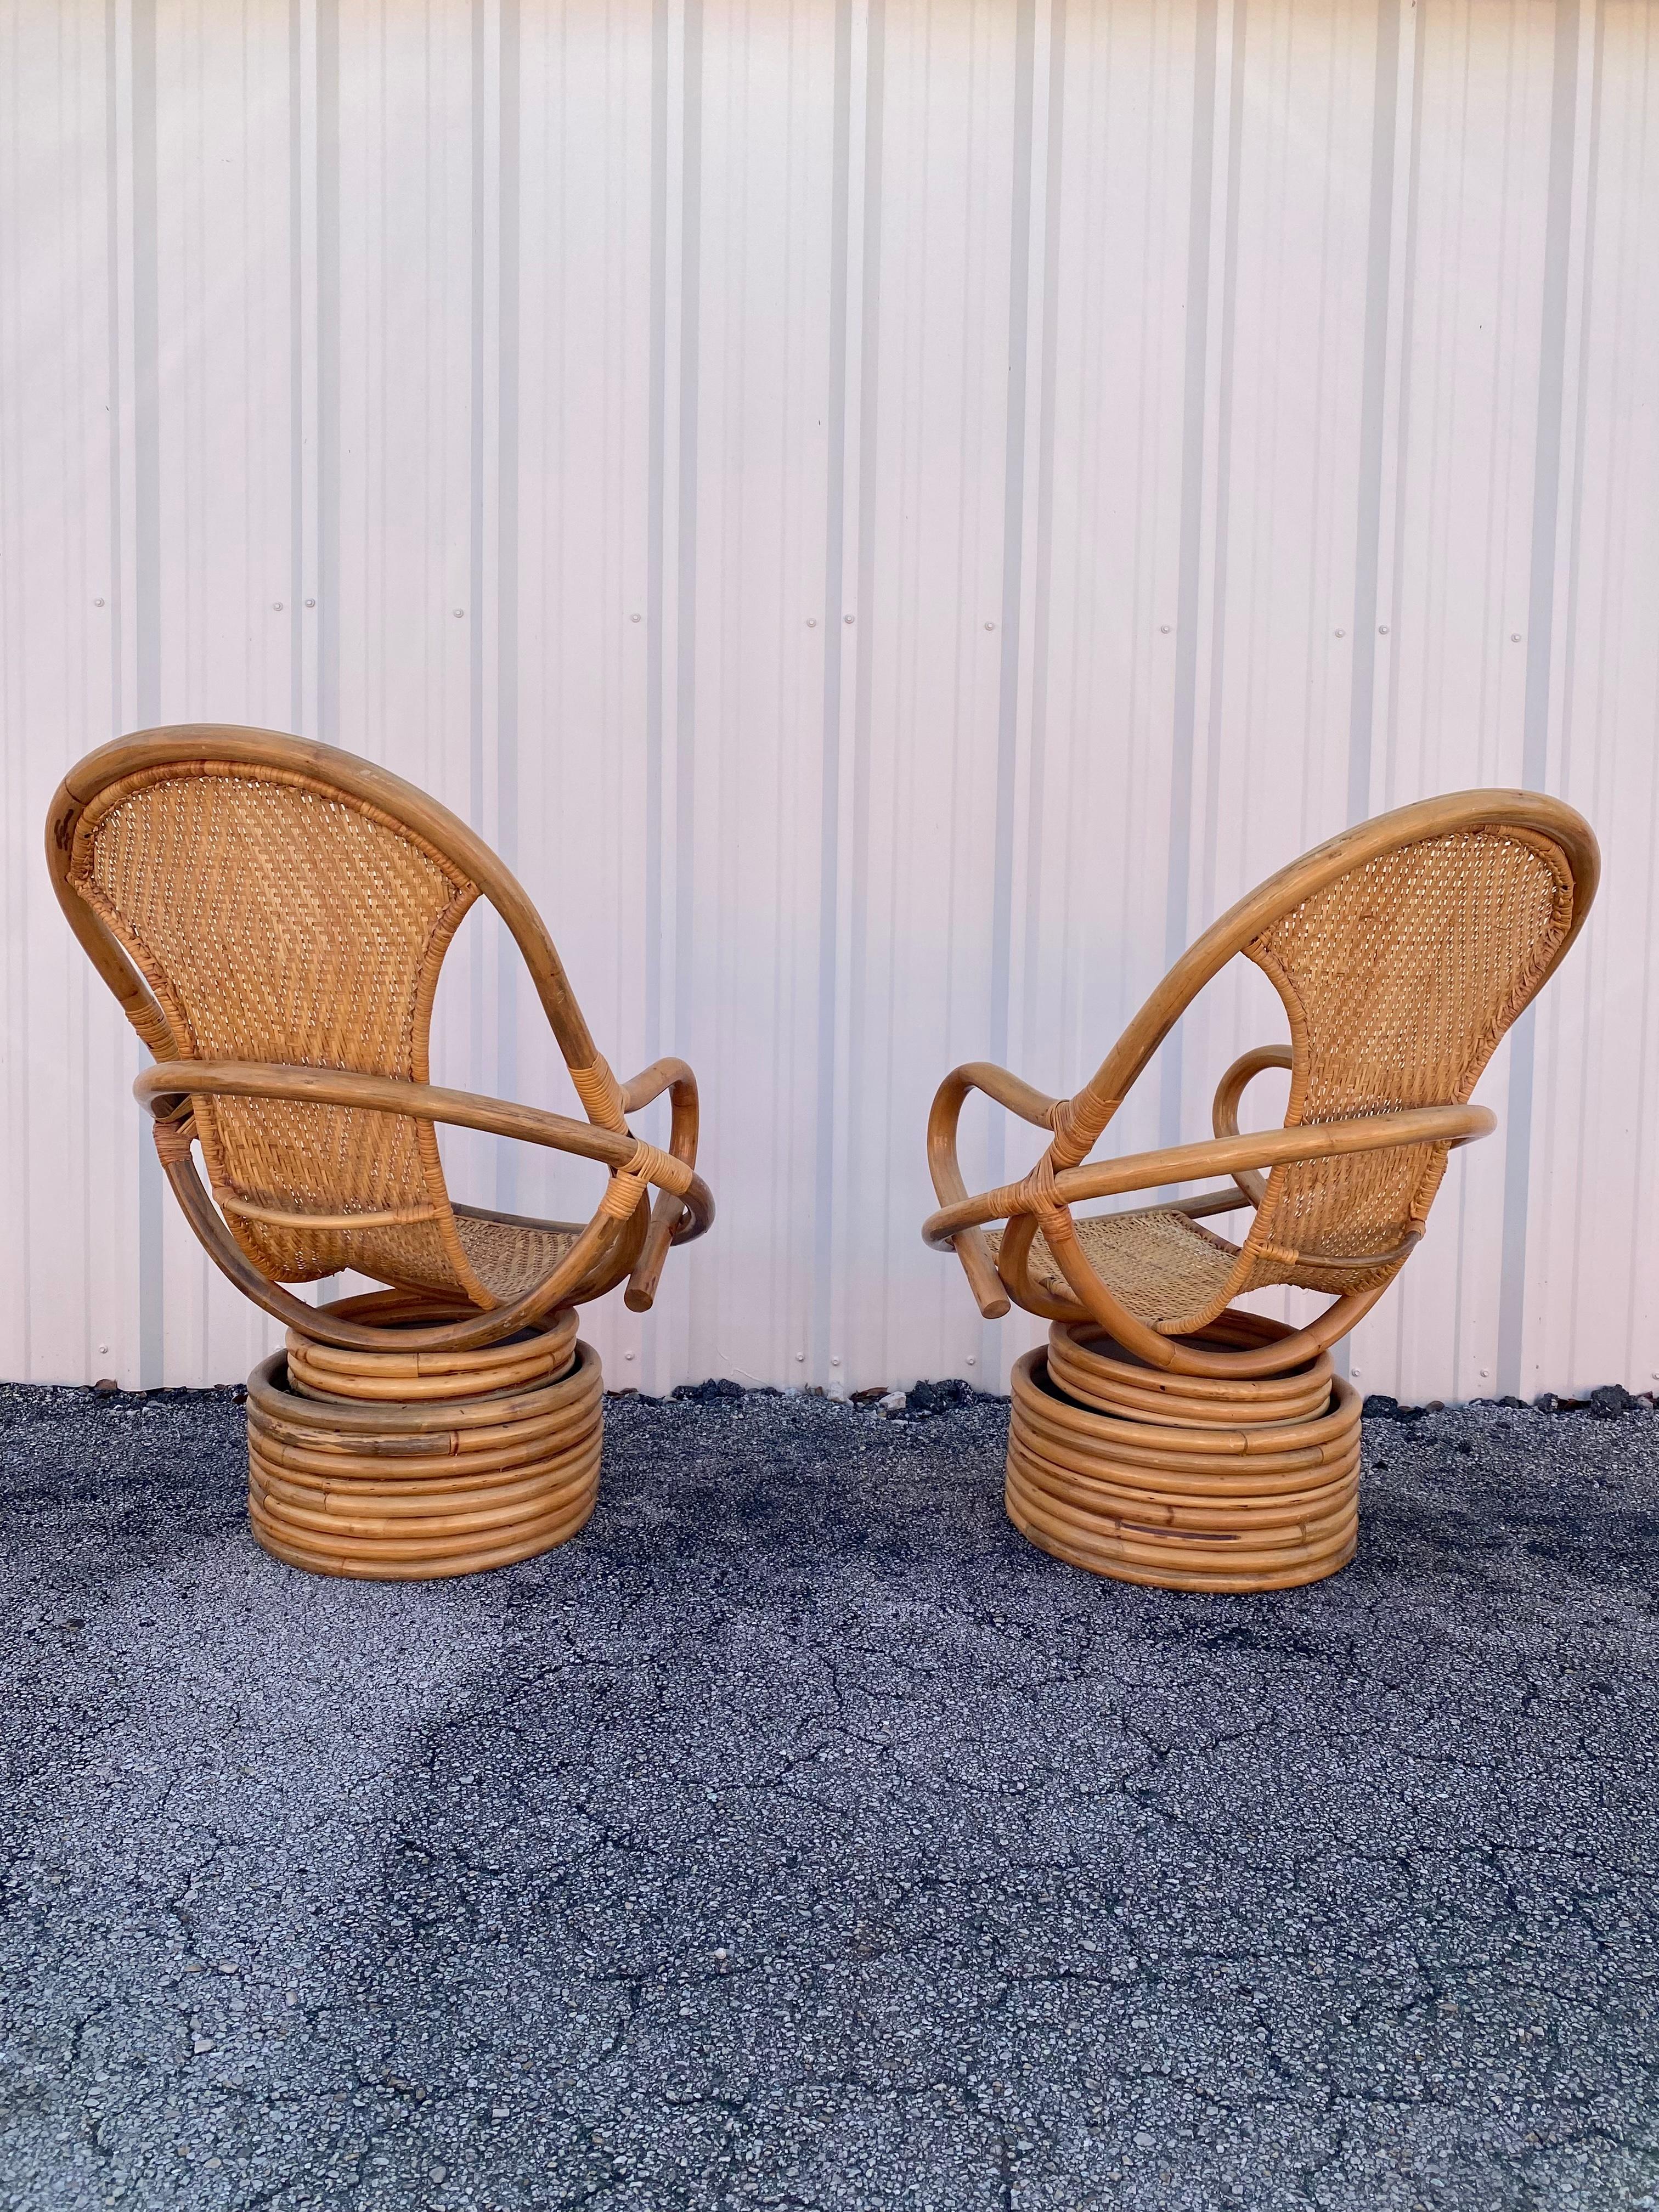 1980s Rattan Coastal Sculptural Swivel Chairs, set of 2 In Good Condition For Sale In Fort Lauderdale, FL